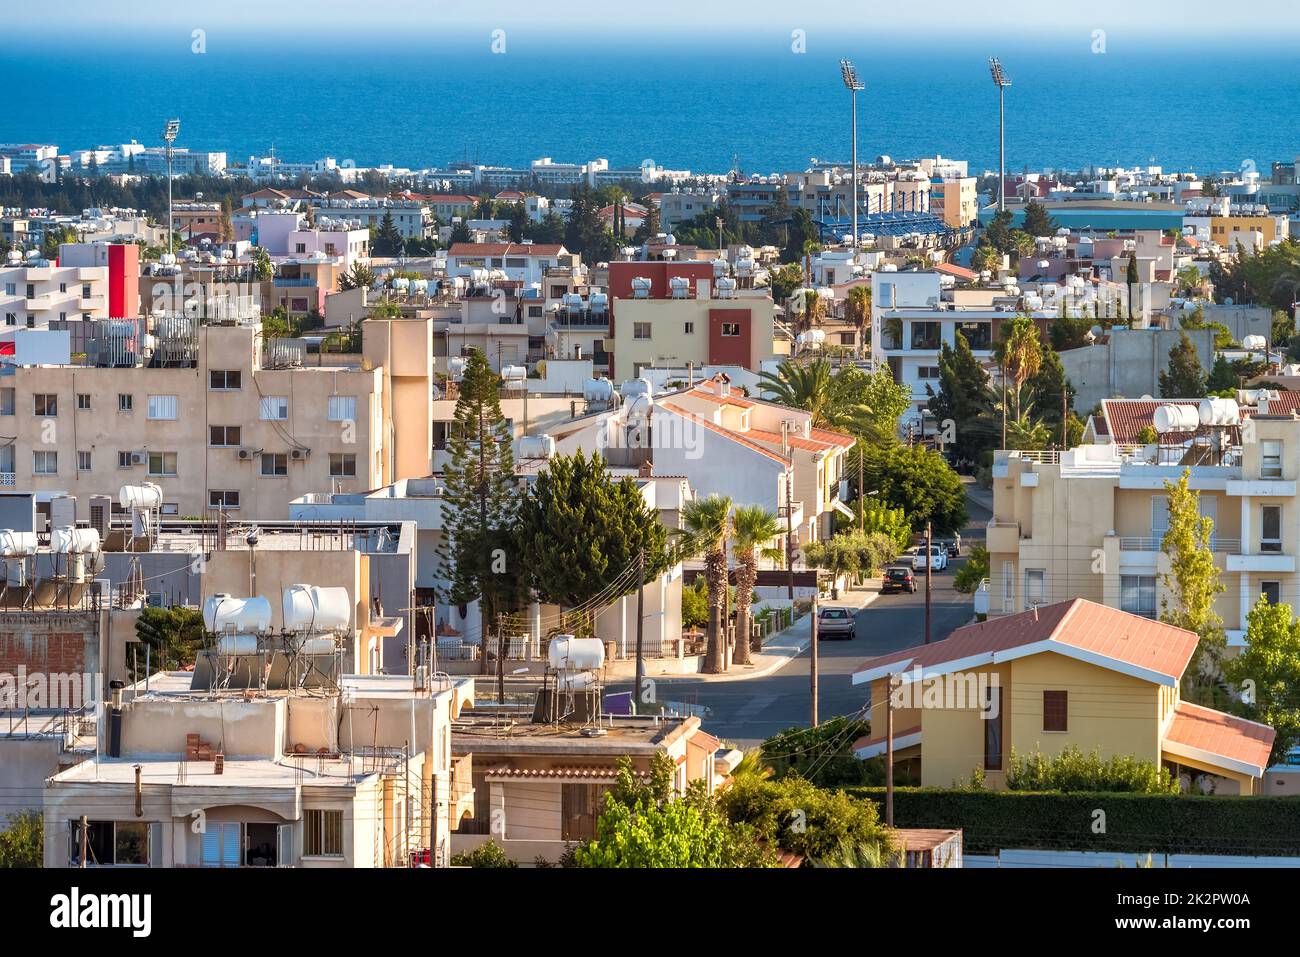 Paphos cityscape over residential neighborhoods. Cyprus Stock Photo